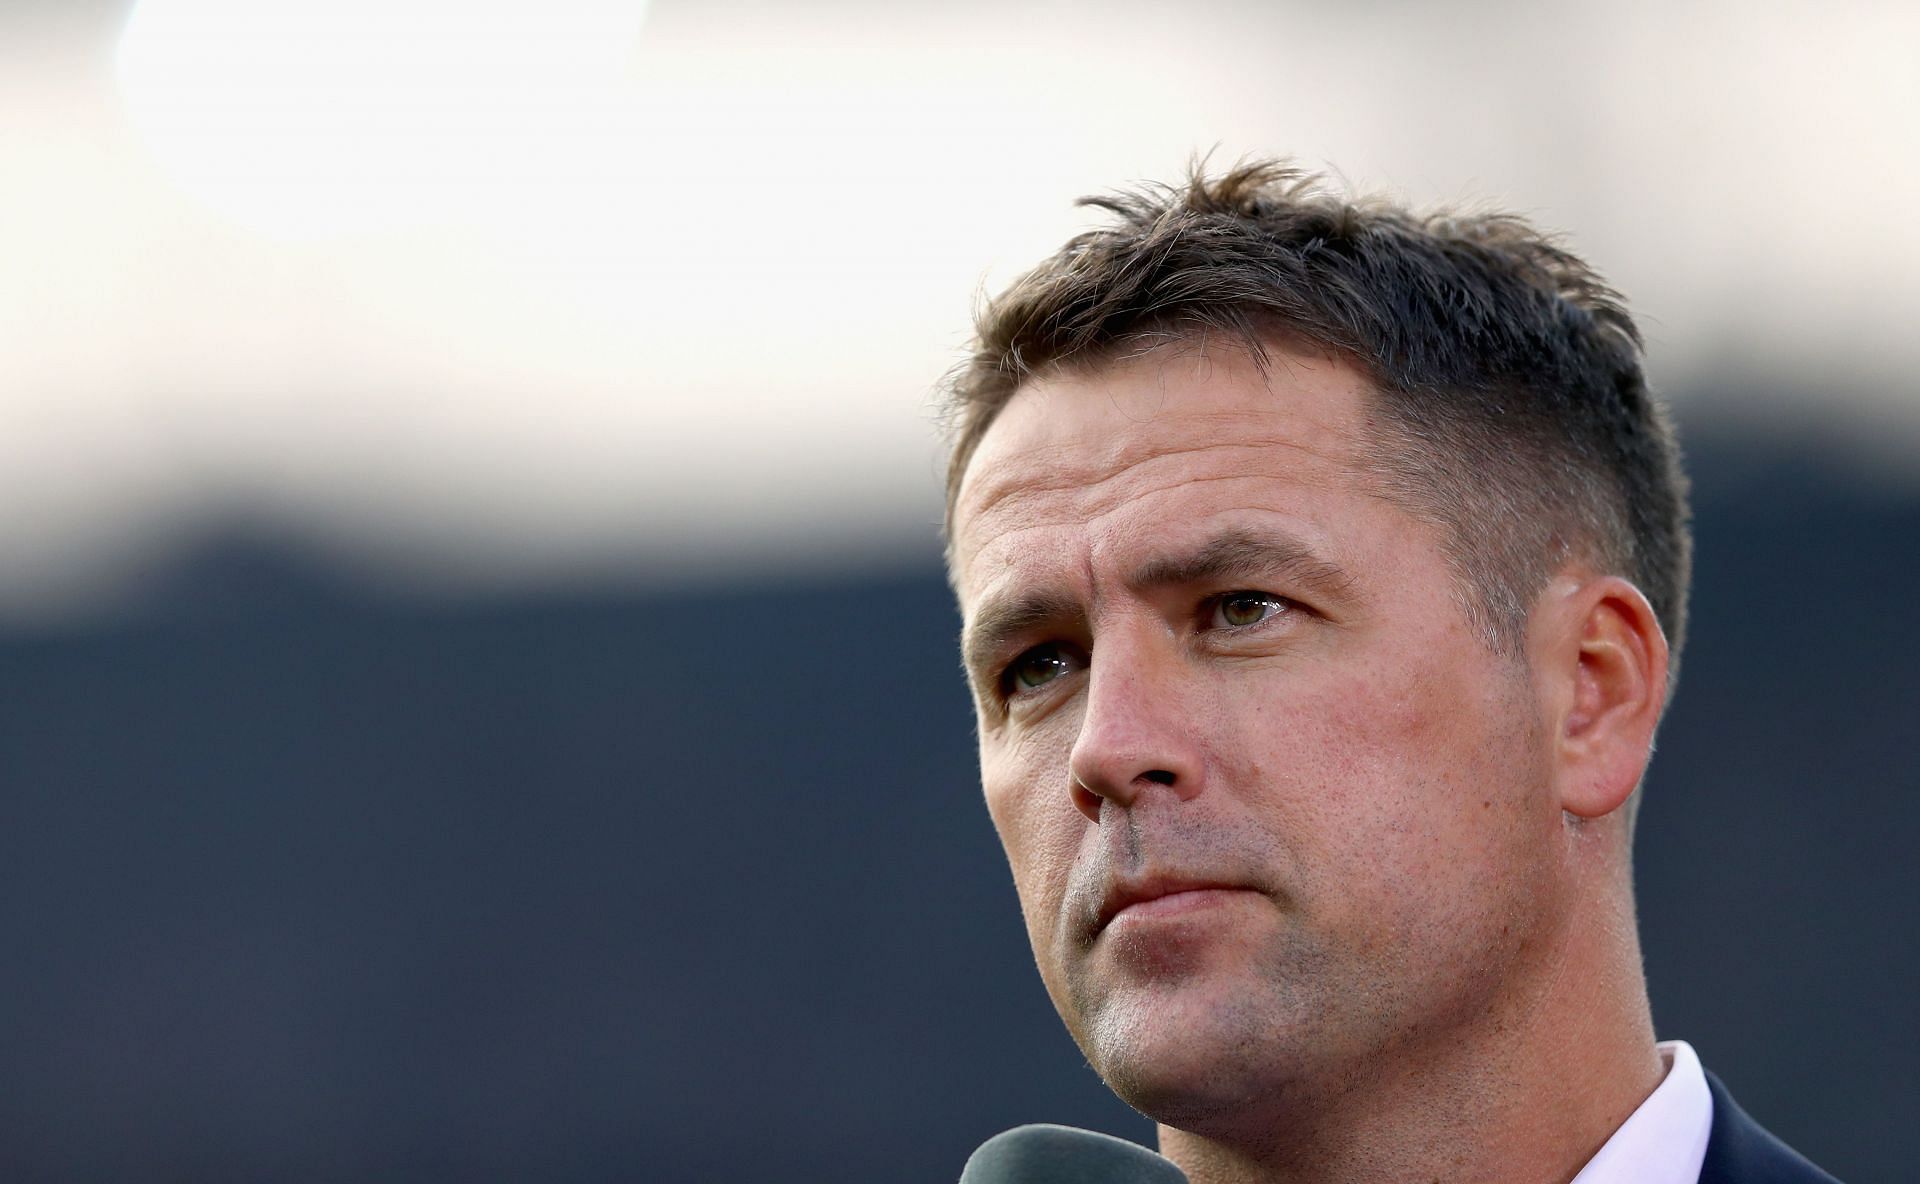 Former player-turned-pundit Michael Owen. (Photo by Dean Mouhtaropoulos/Getty Images)